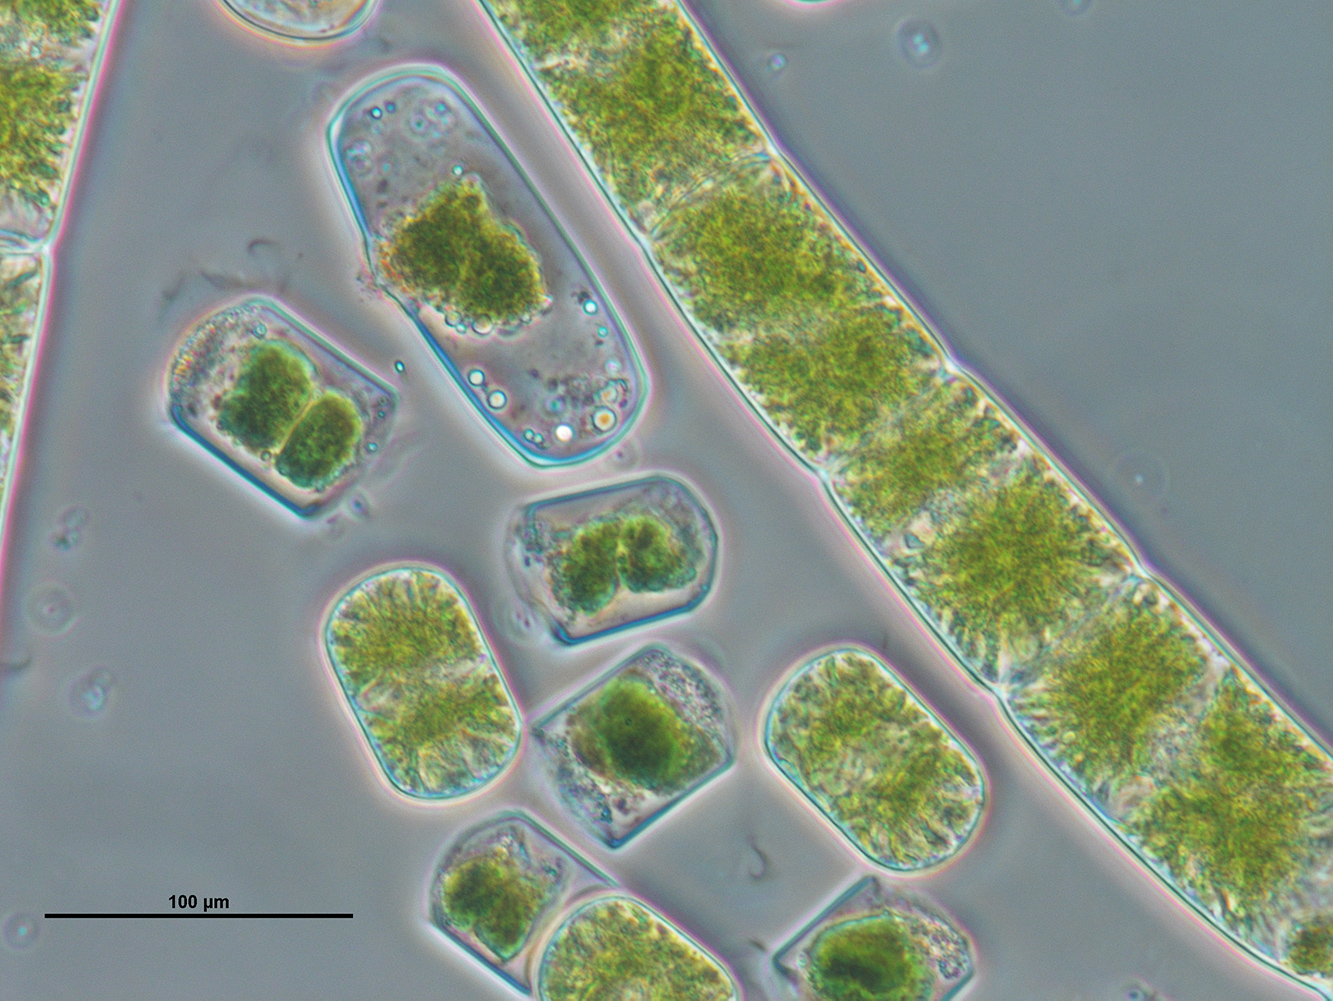 Brightfield image captured by Xuehuan Feng, featuring conjugating green algae with unbranched filaments (Zygnema circumcarinatum).